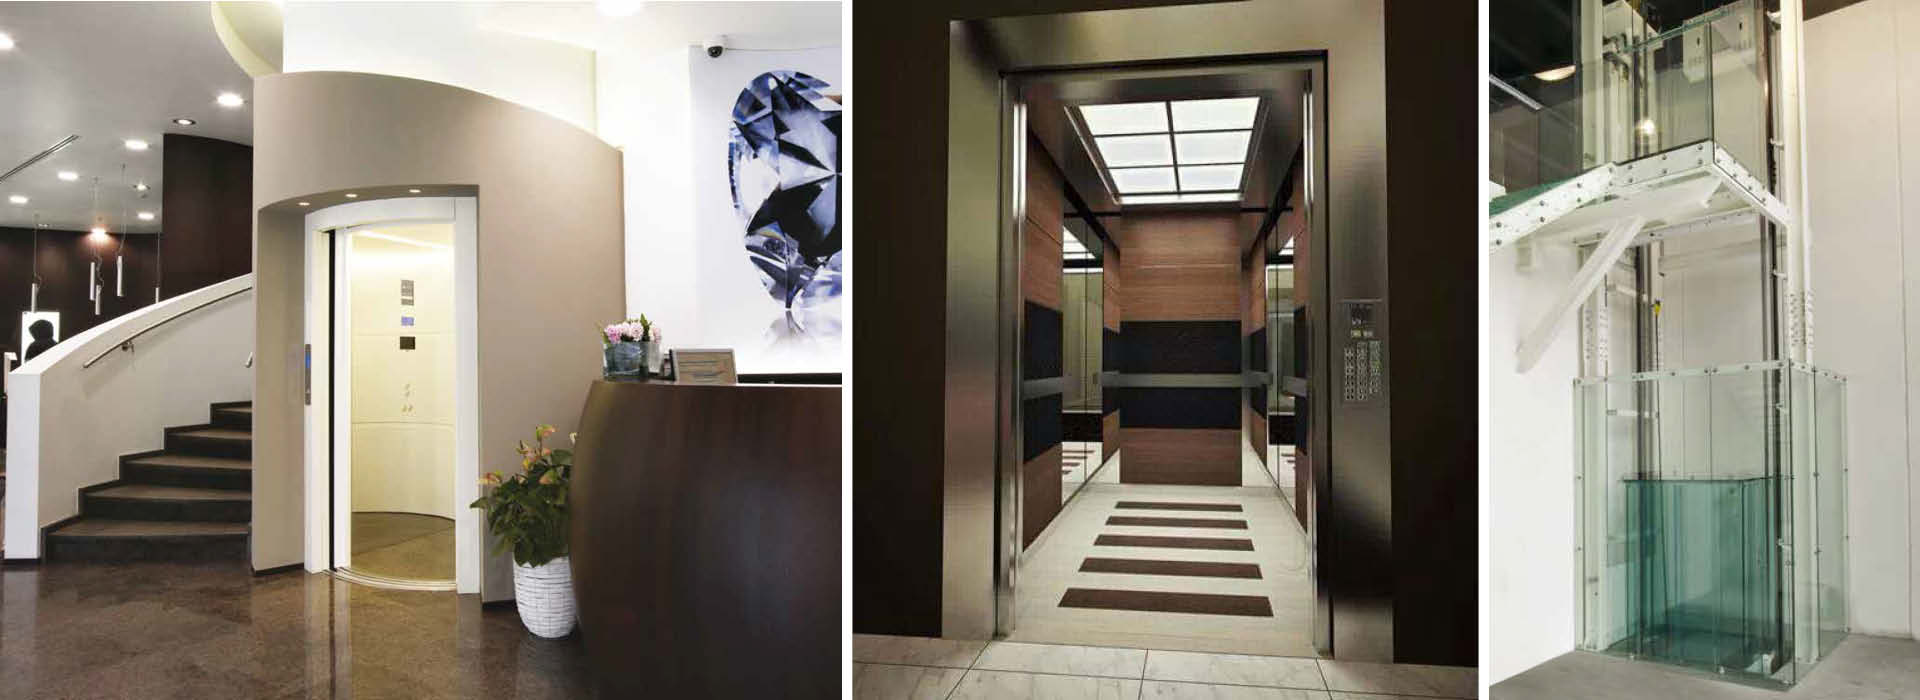 Examples of Axel and Gruppo Millepani Commercial Elevators available from McGrath Industries in New Zealand